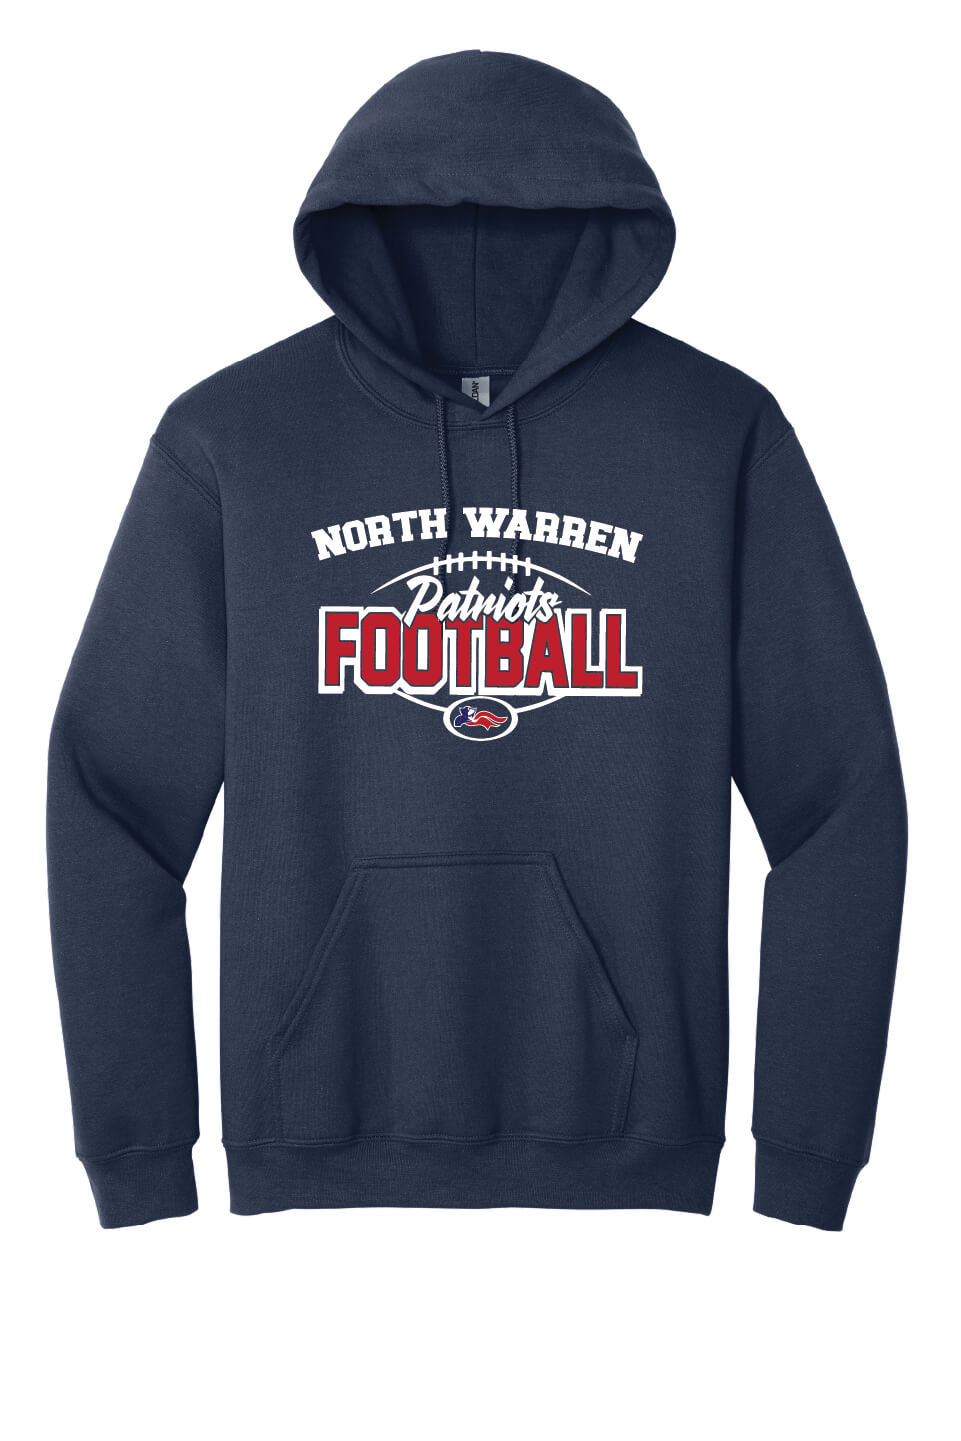 NW Patriots Football Hoodie (Youth) navy